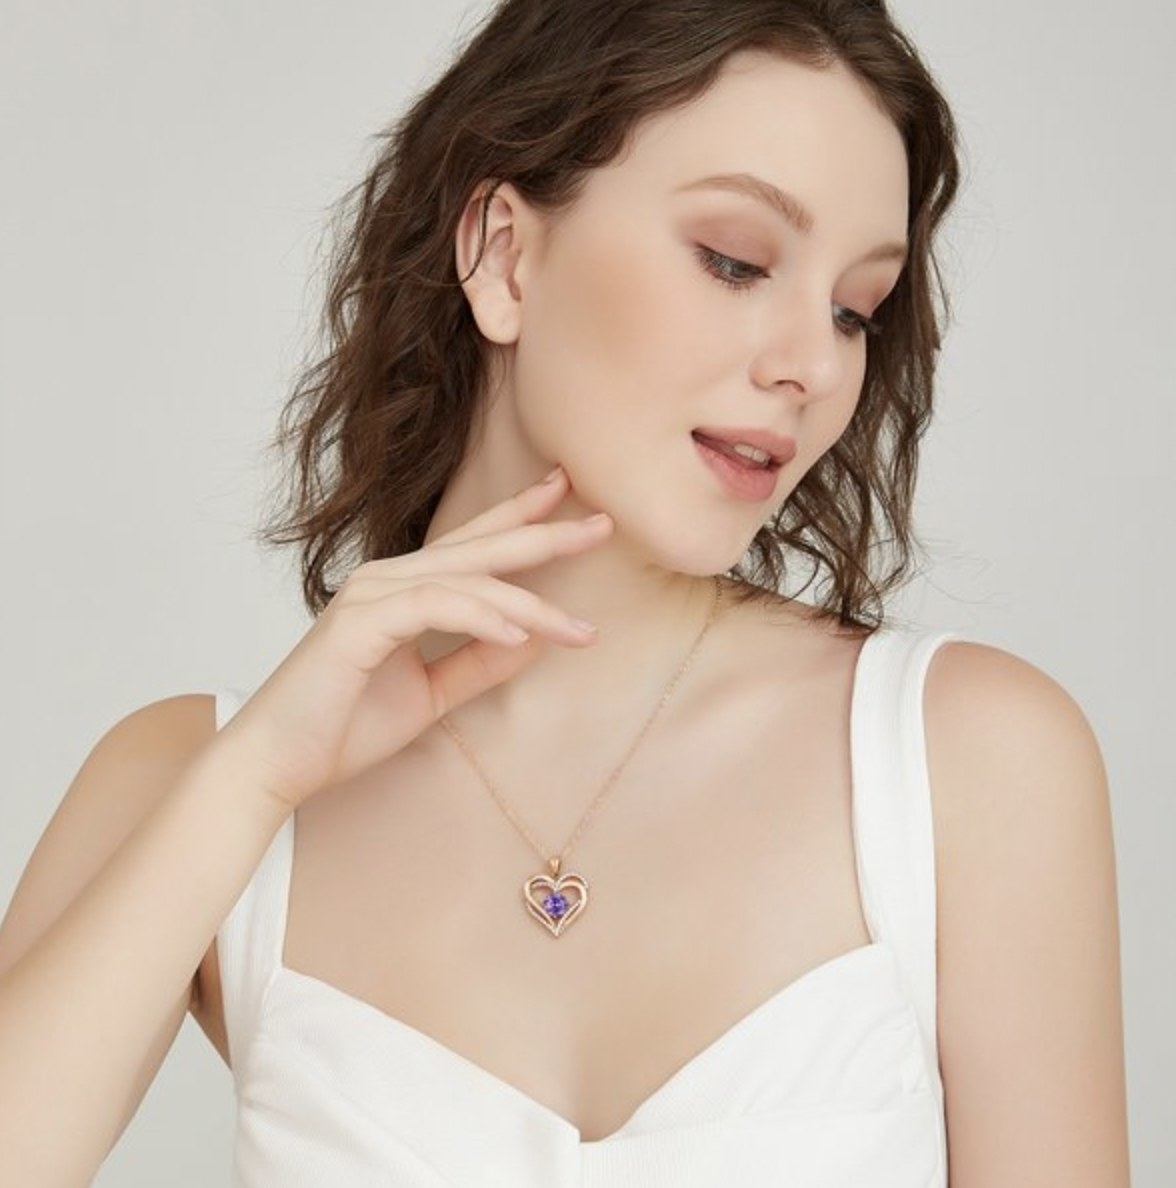 Model with the purple amethyst necklace on